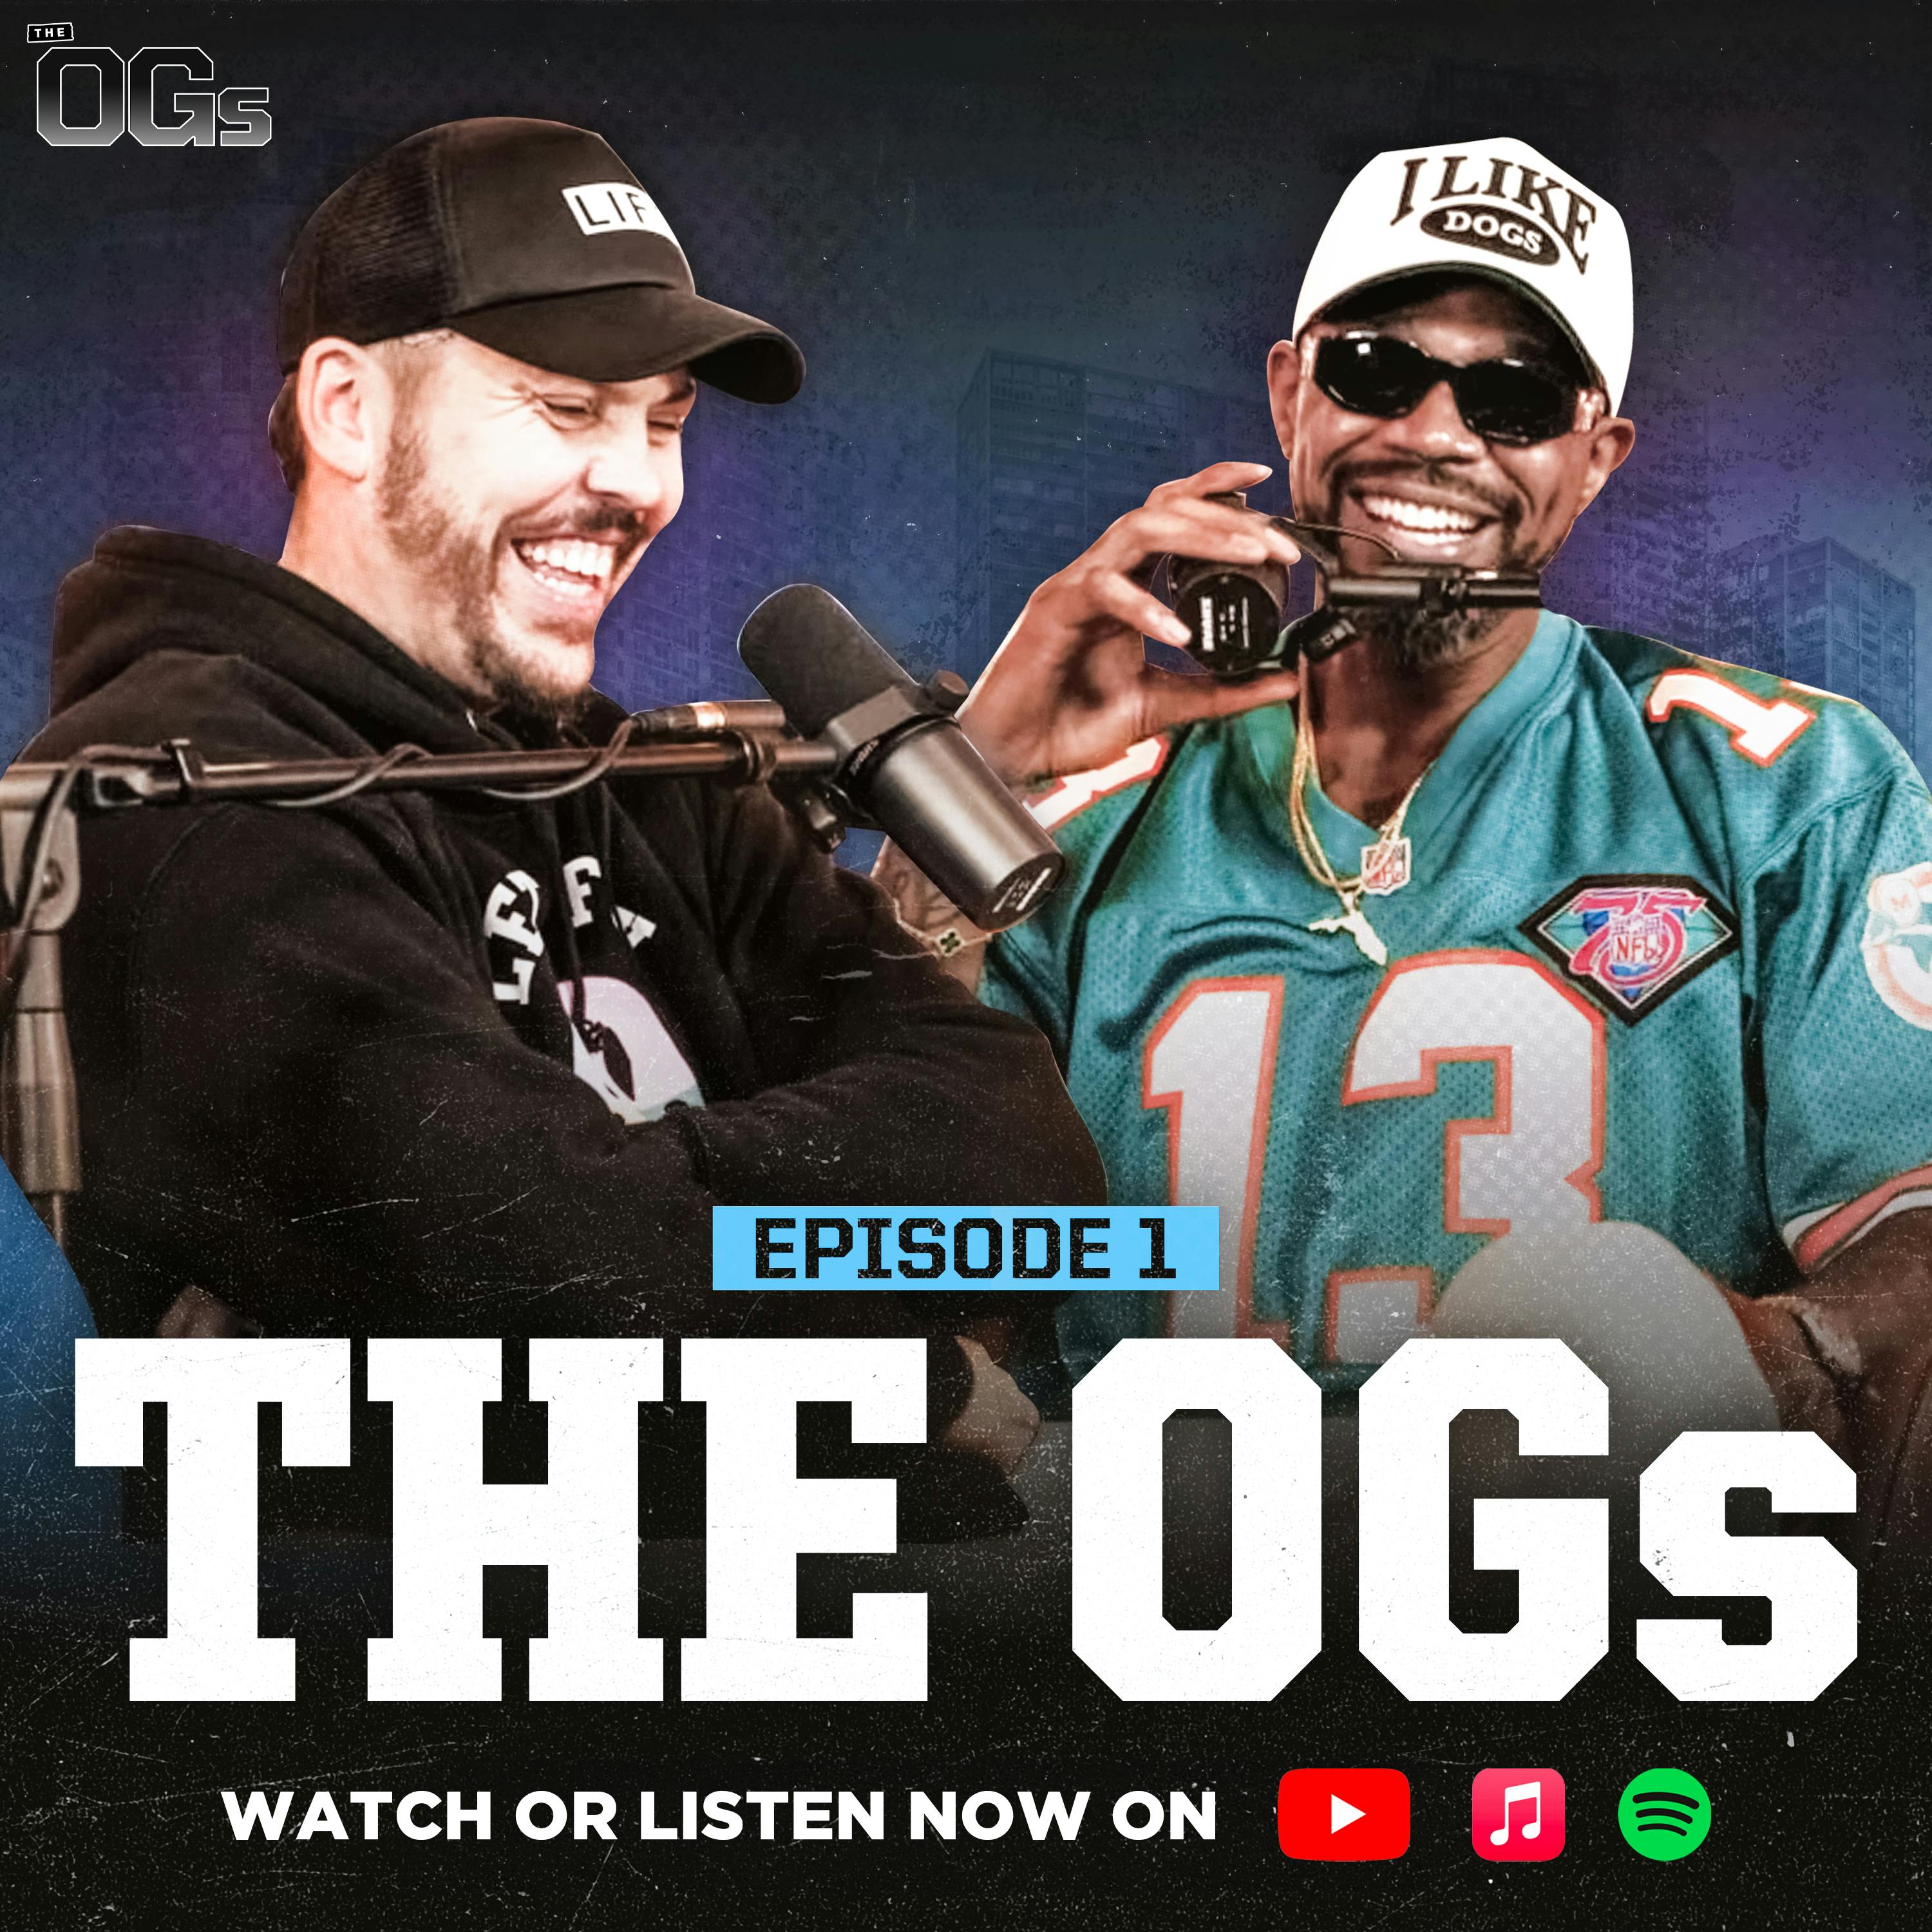 The OGs Episode 1 UD Thinks Draymond Green Is “Crazy Smart” & Paolo Banchero Is An MVP?!